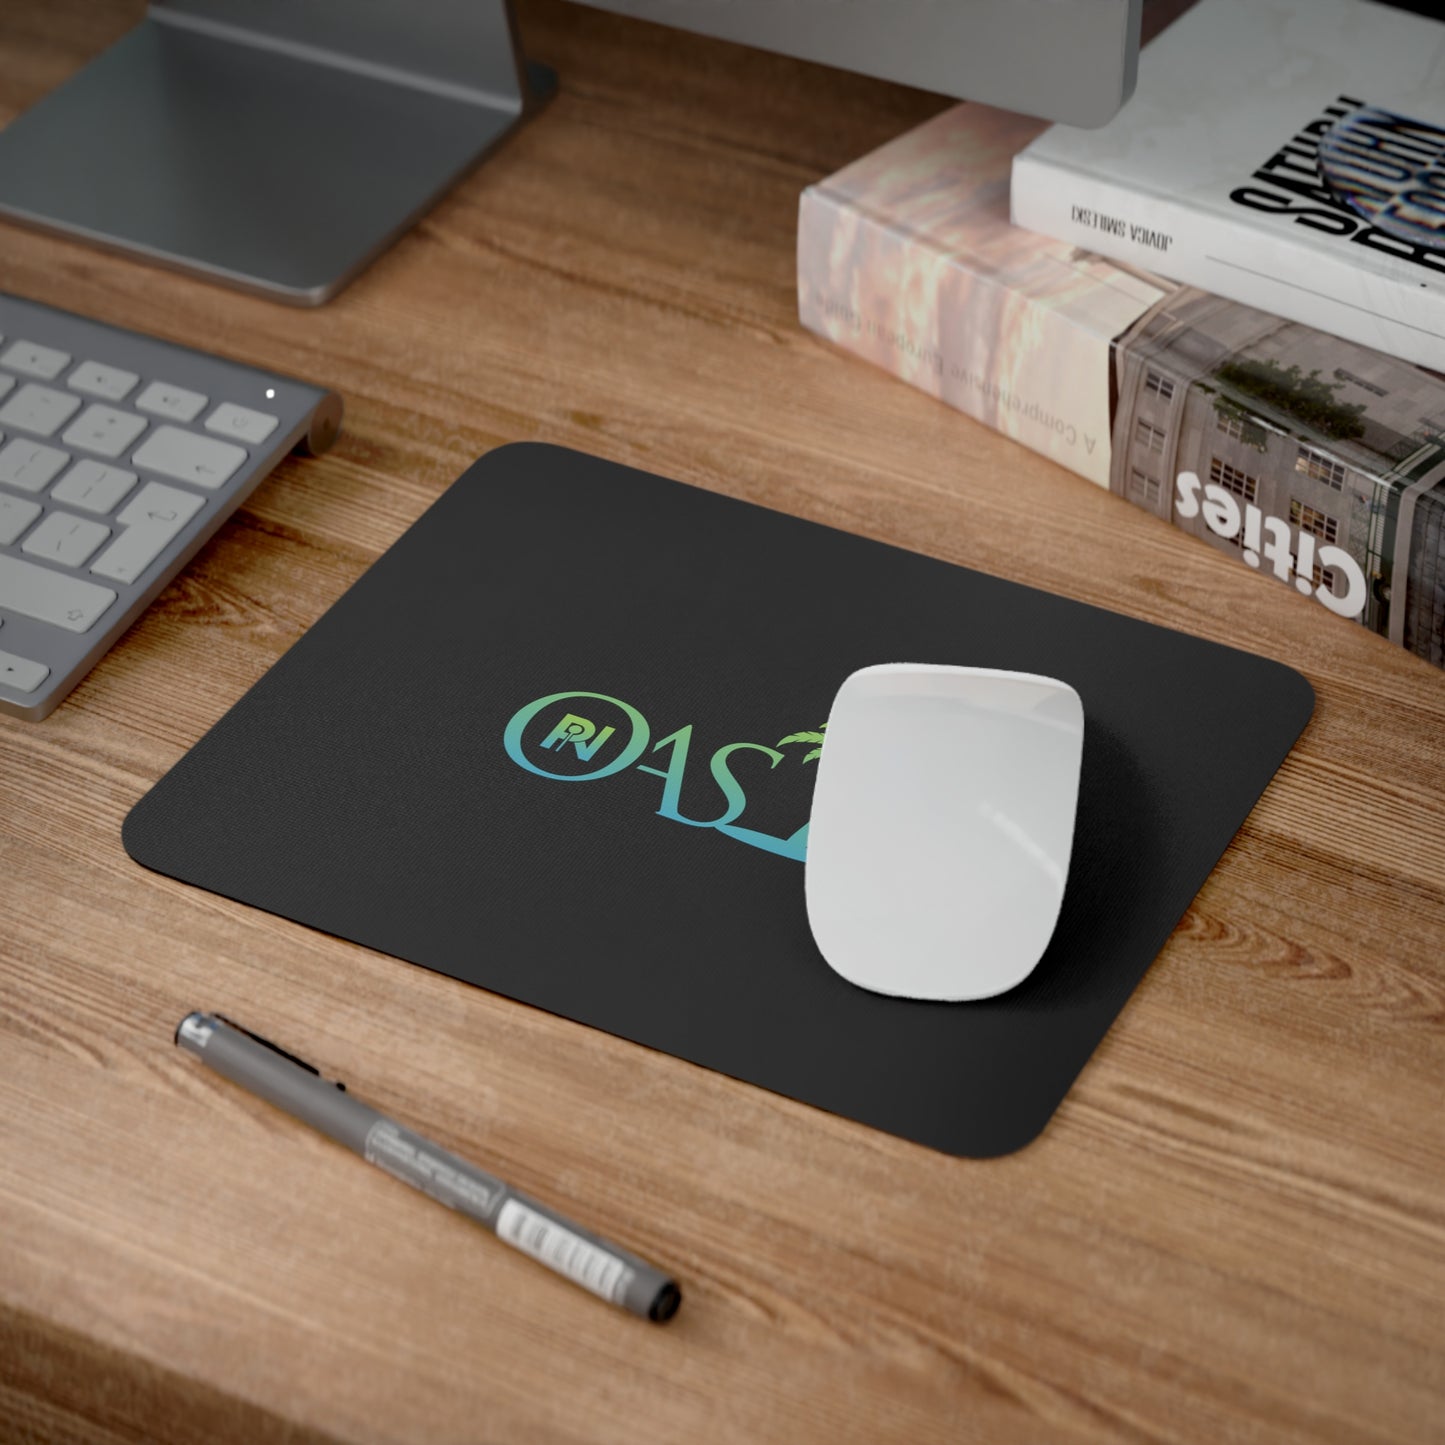 Desk Mouse Pad (PIN Oasis)